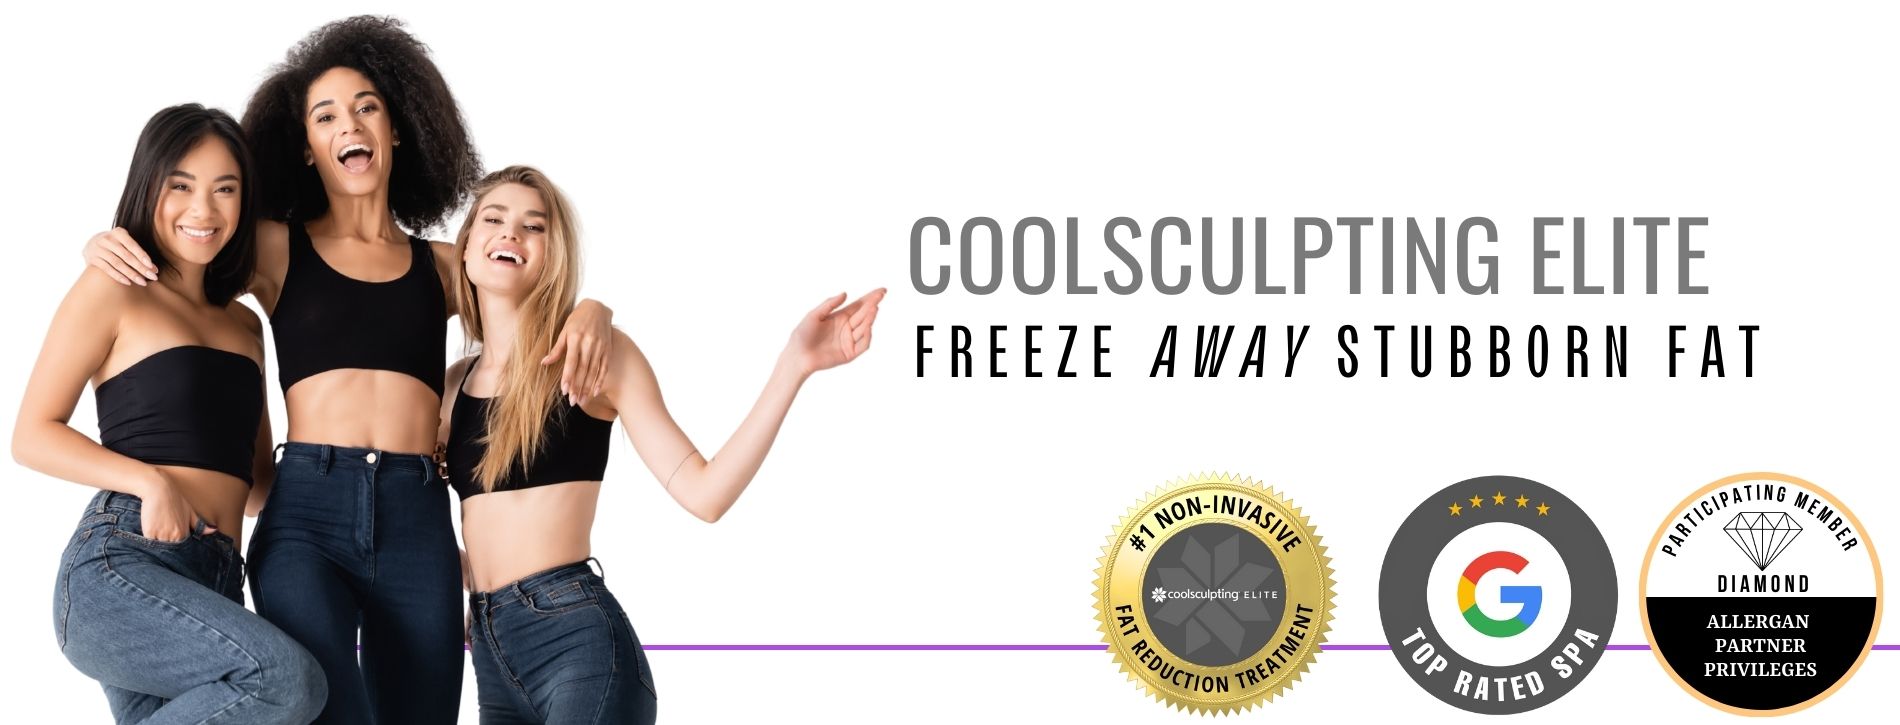 CoolSculpting Elite for Upper Arm Fat in Dallas-Ft. Worth, TX